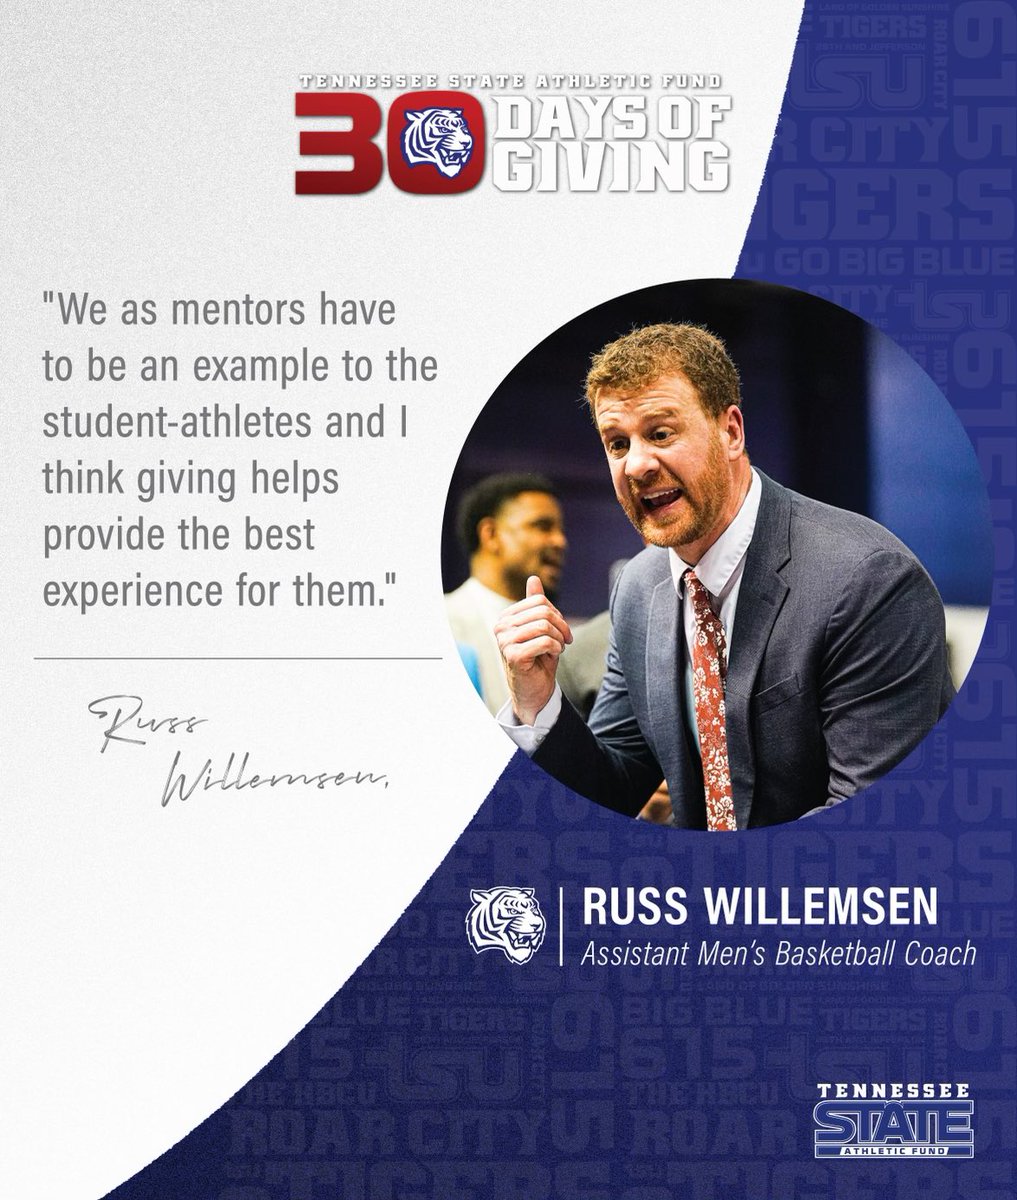 Coach Russ believes that it’s essential for us as mentors to invest into our student athletes. As mentors to our student athletes, it’s our responsibility to nurture dreams, inspire excellence, and create a legacy of support. 💙 #MonthOfGiving #Deserve2Win